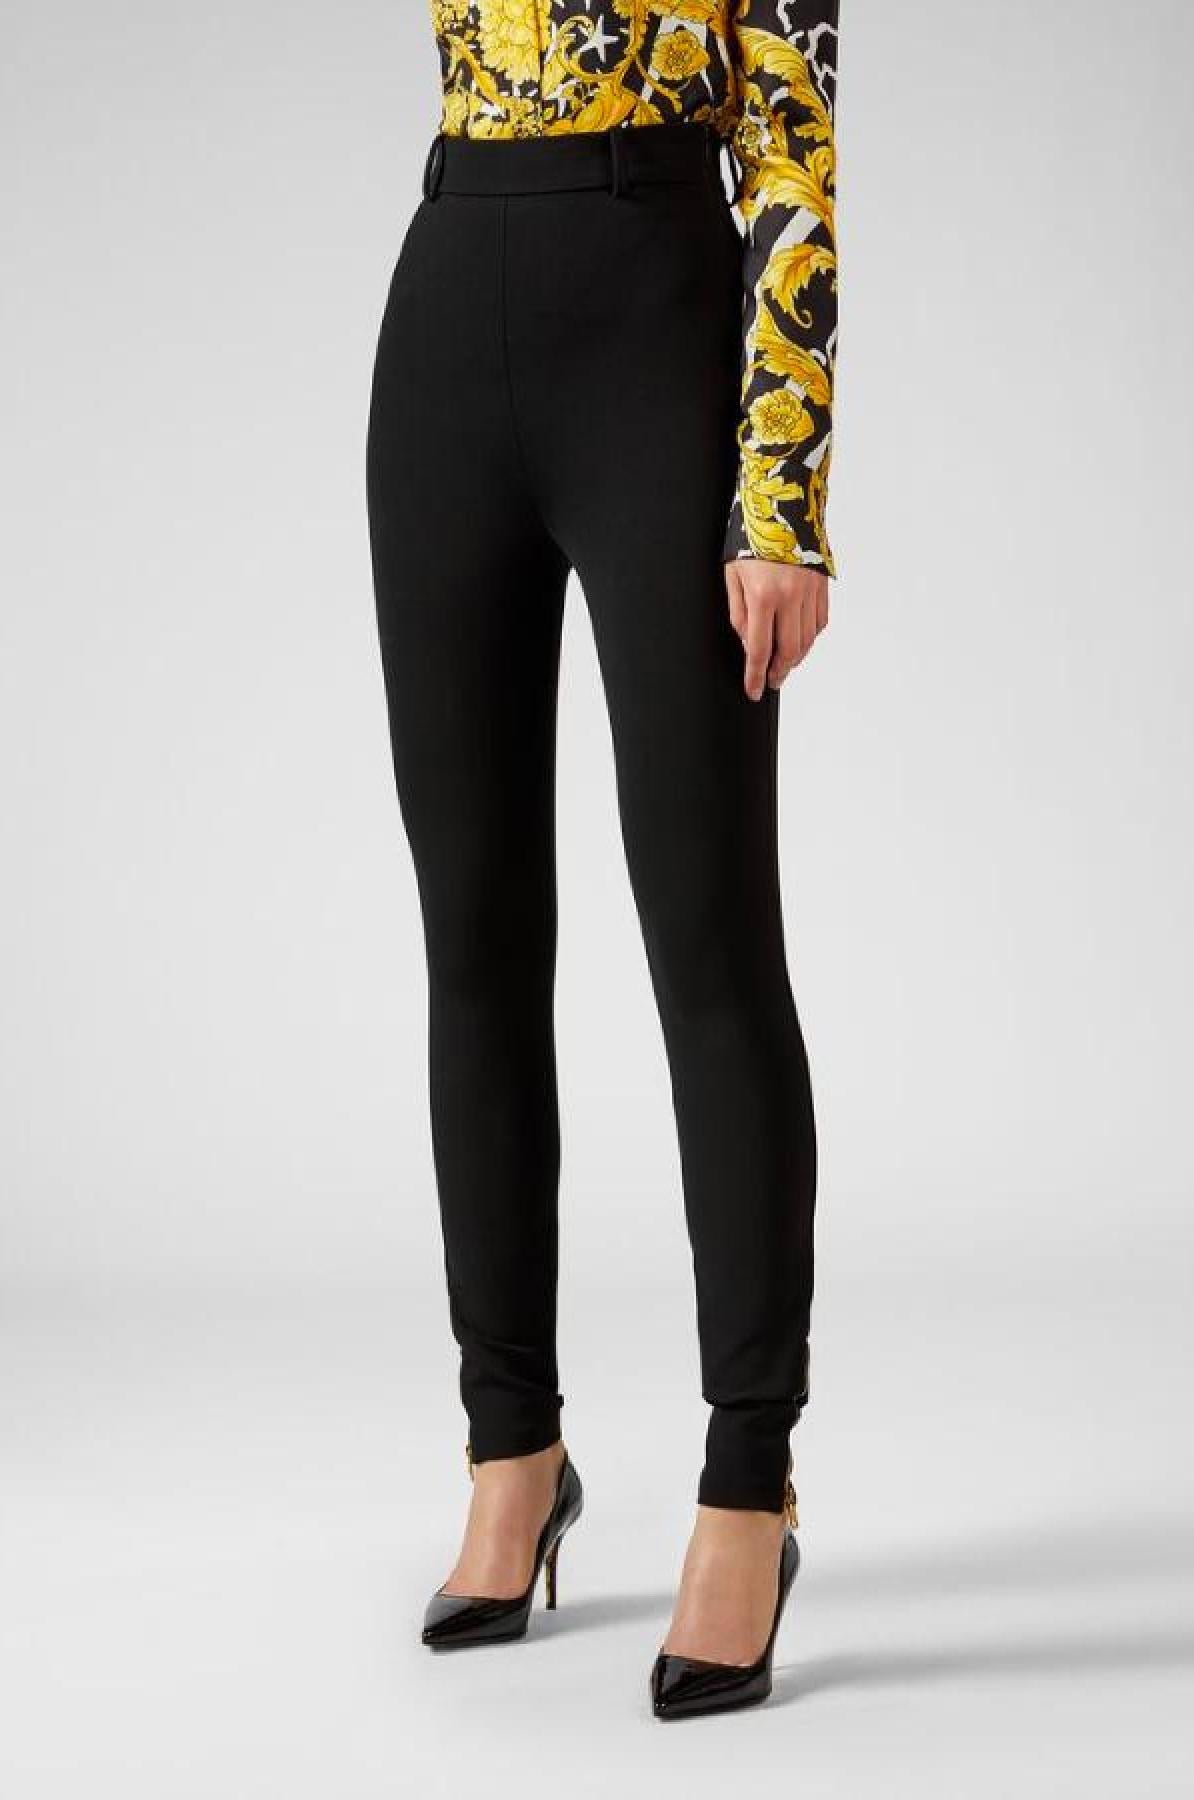 Versace Black Formal Knit Fitted Leggings / Pants Size 36 In New Condition For Sale In Paradise Island, BS